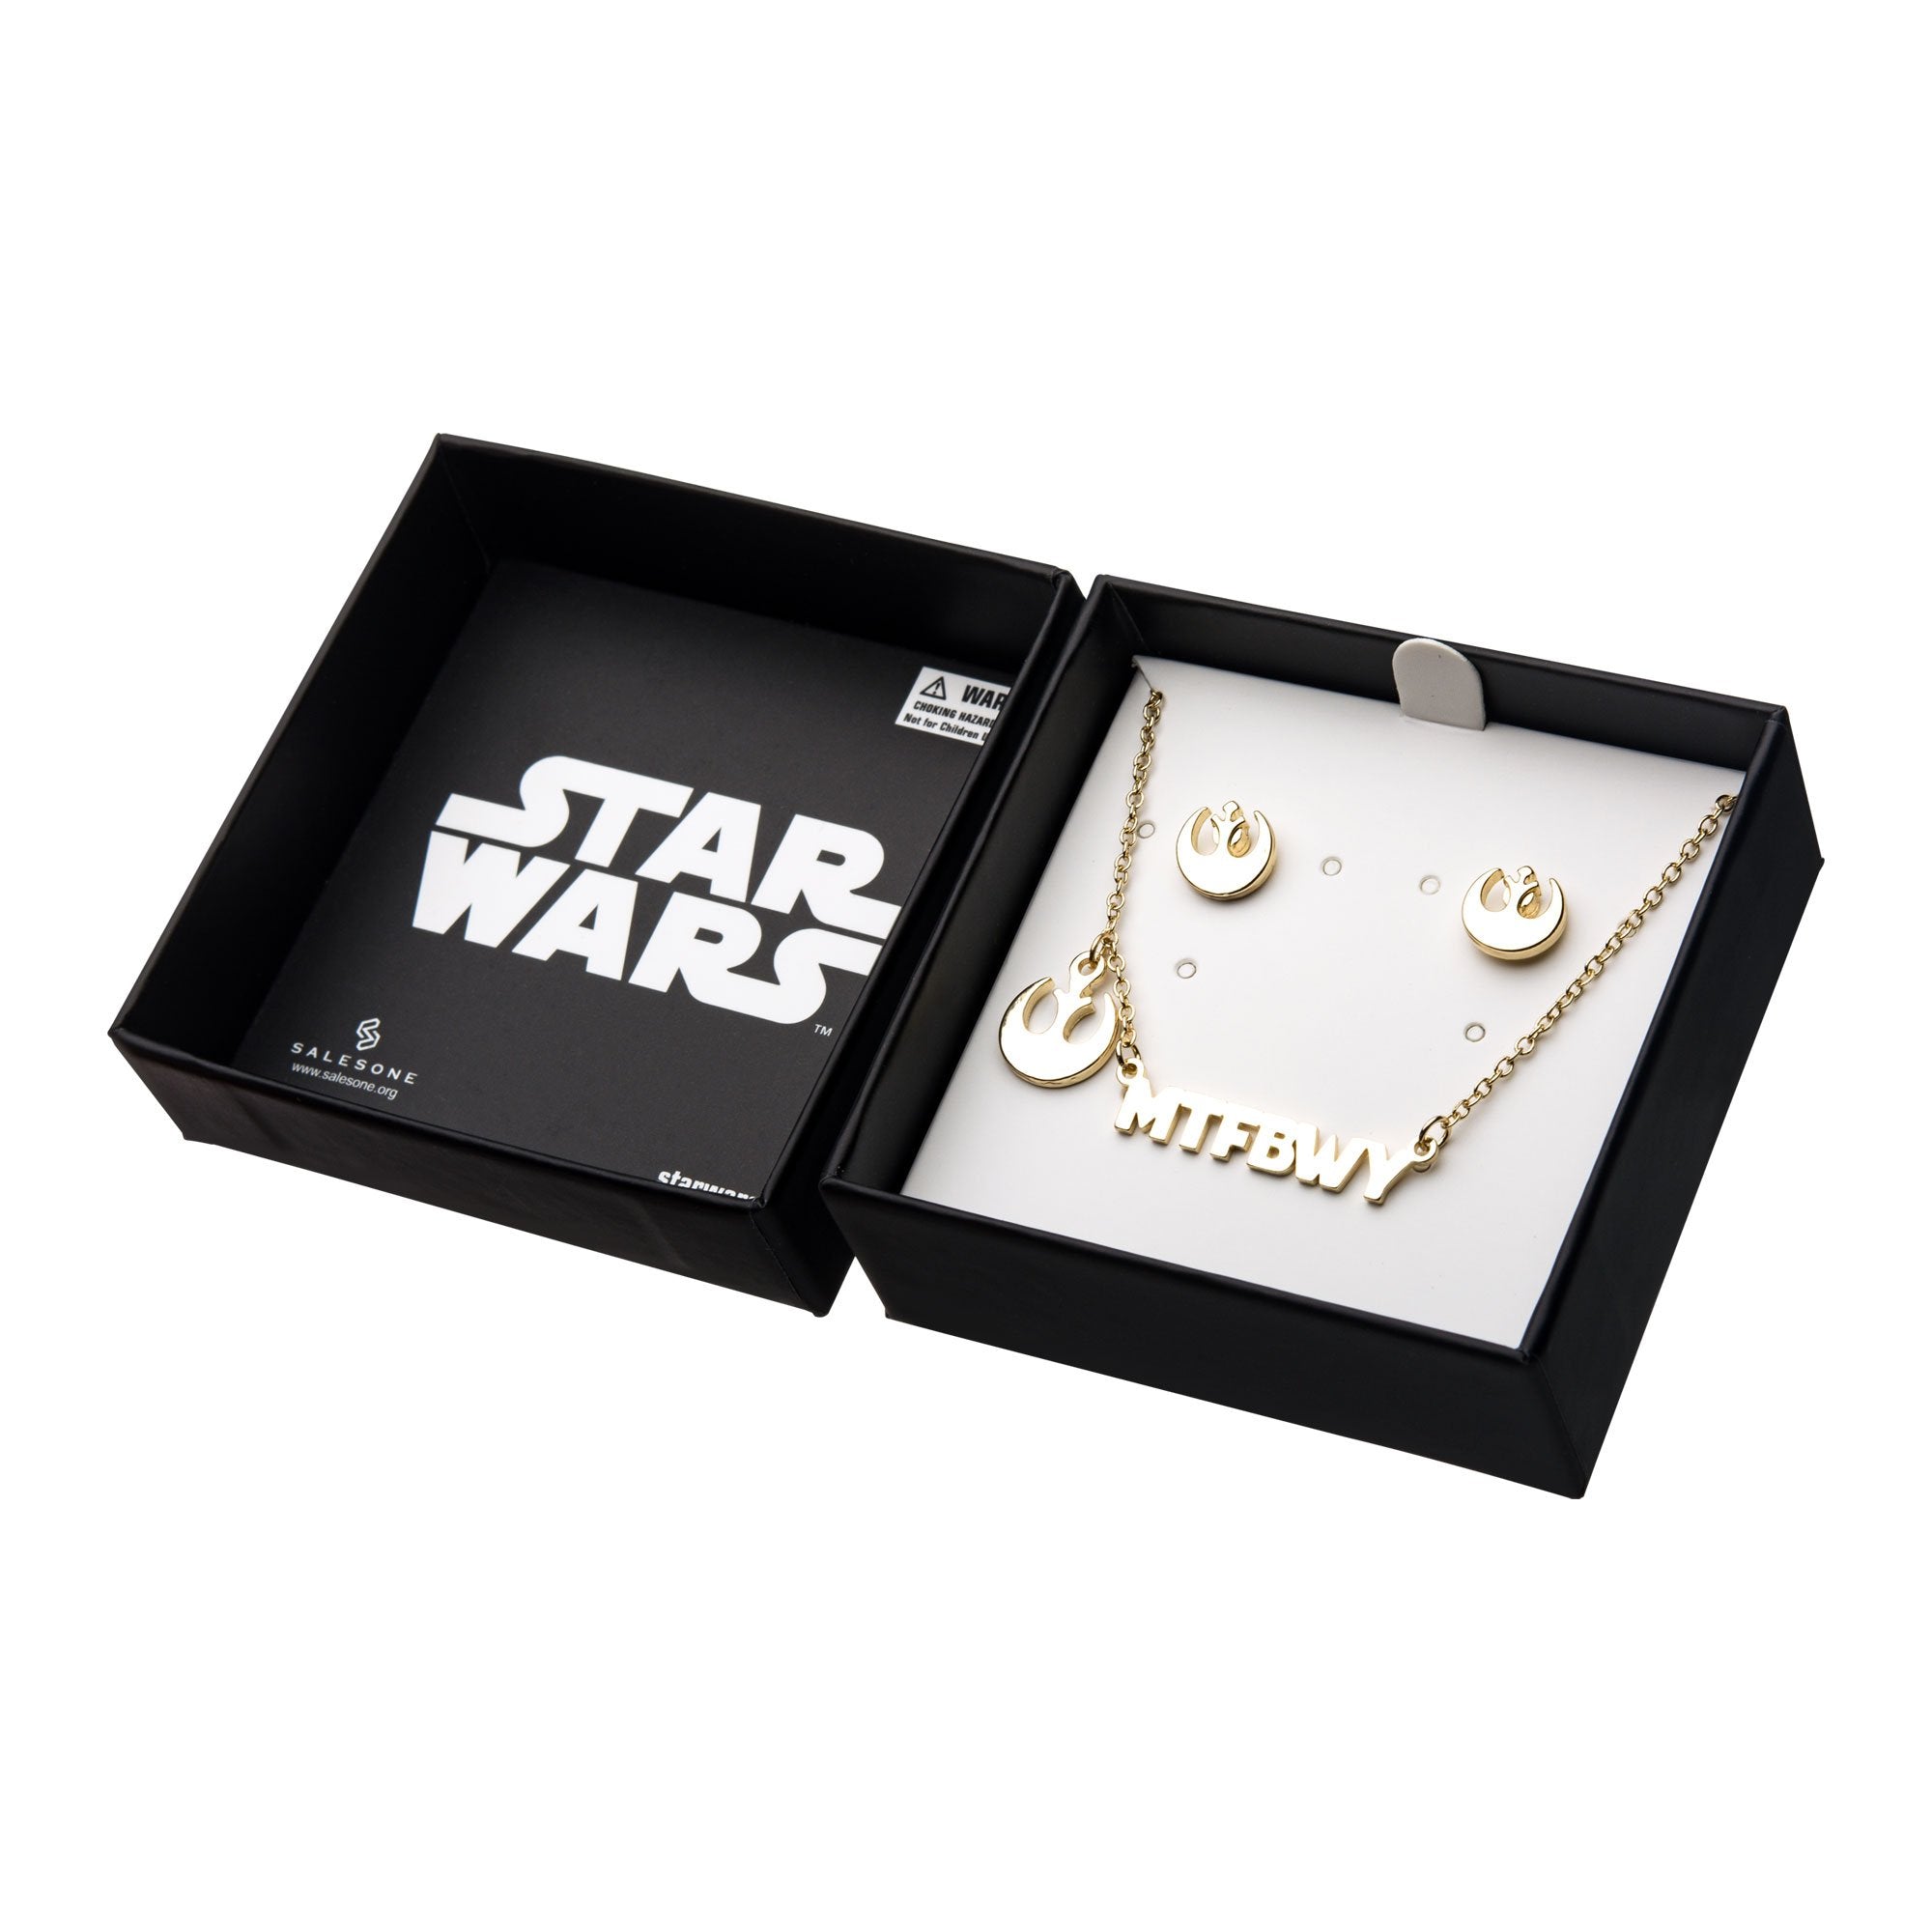 Star Wars "May The Force Be With You" Pendant Necklace & Earrings Set